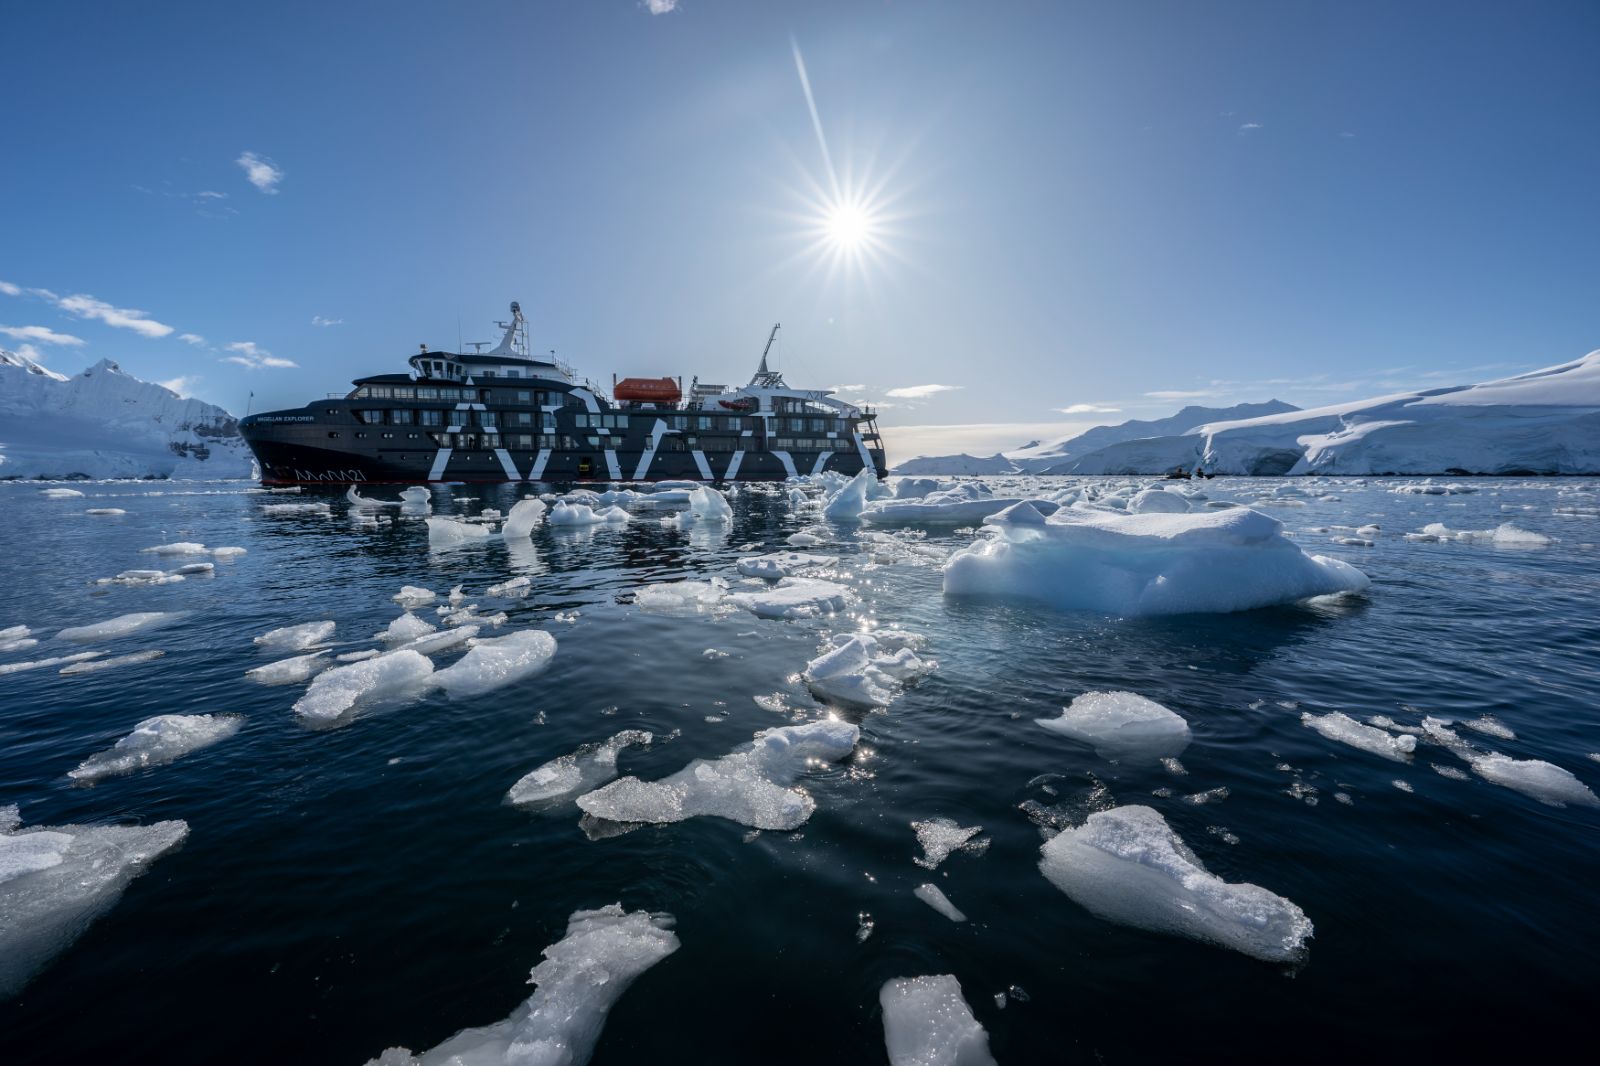 The Magellan Explorer in Antarctica surrounded by floating ice